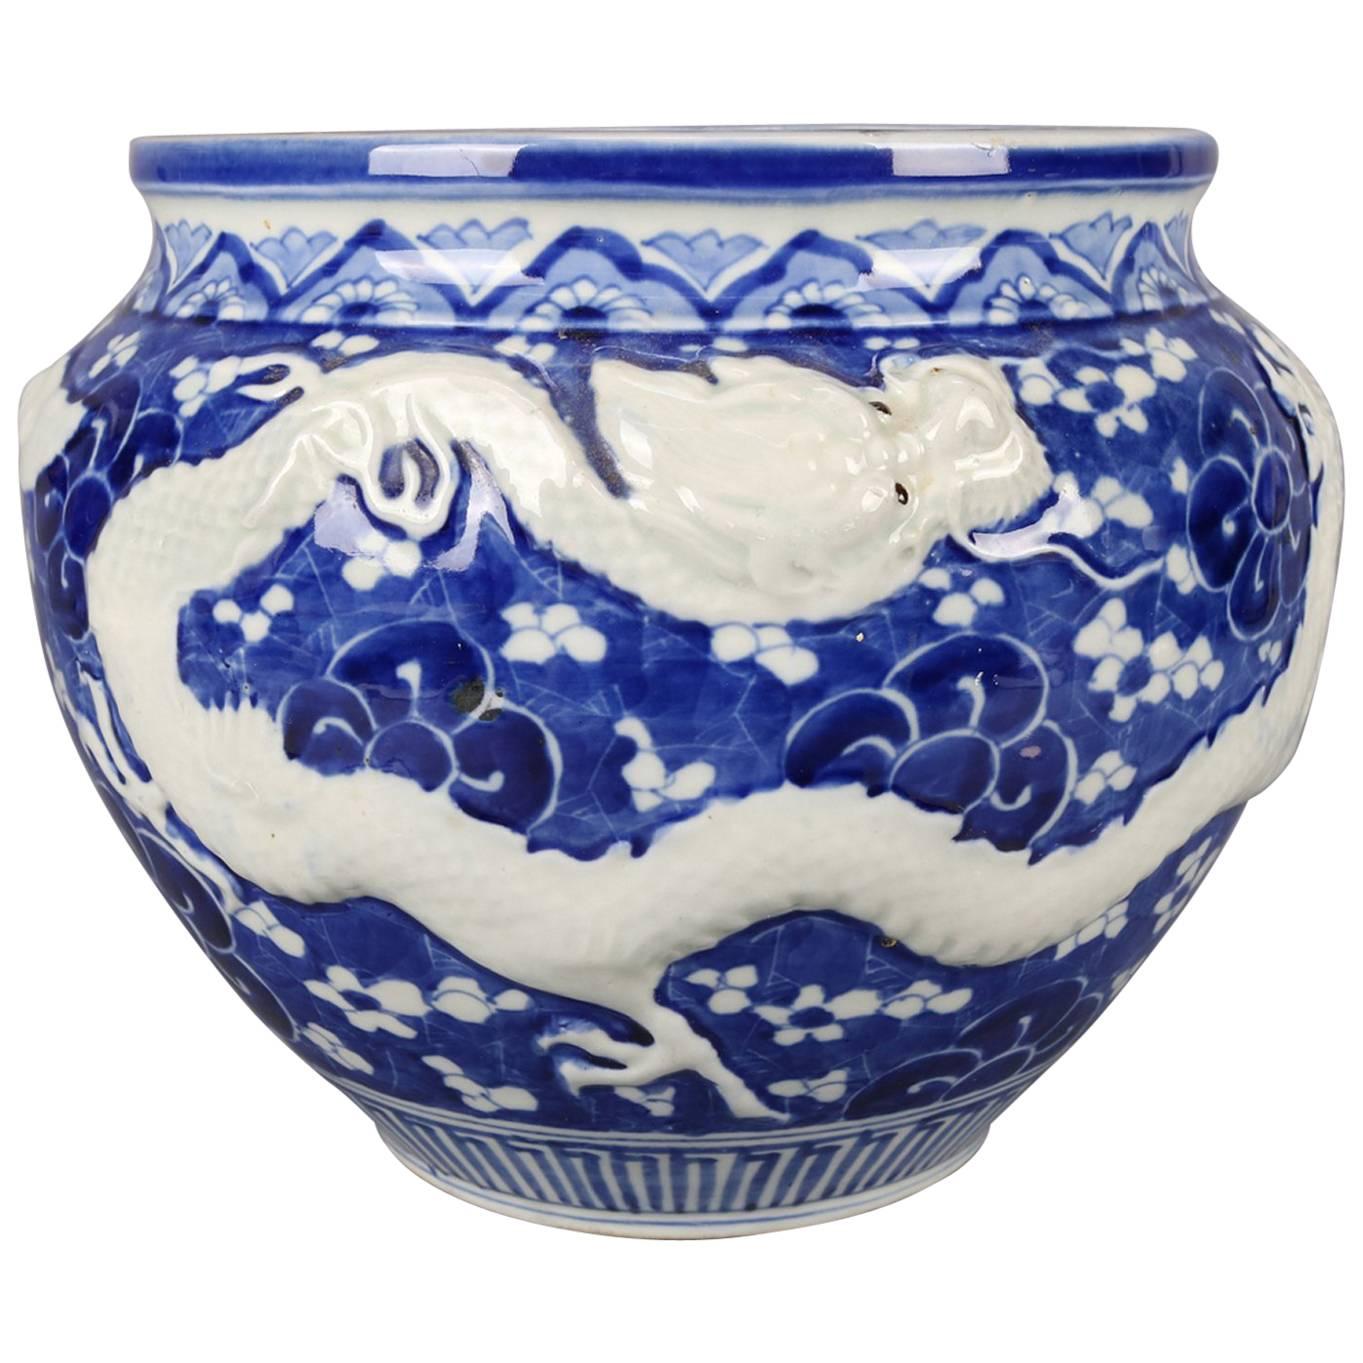 Chinese Hand-Painted High Relief Porcelain Dragon Jardeniere, Blue and White